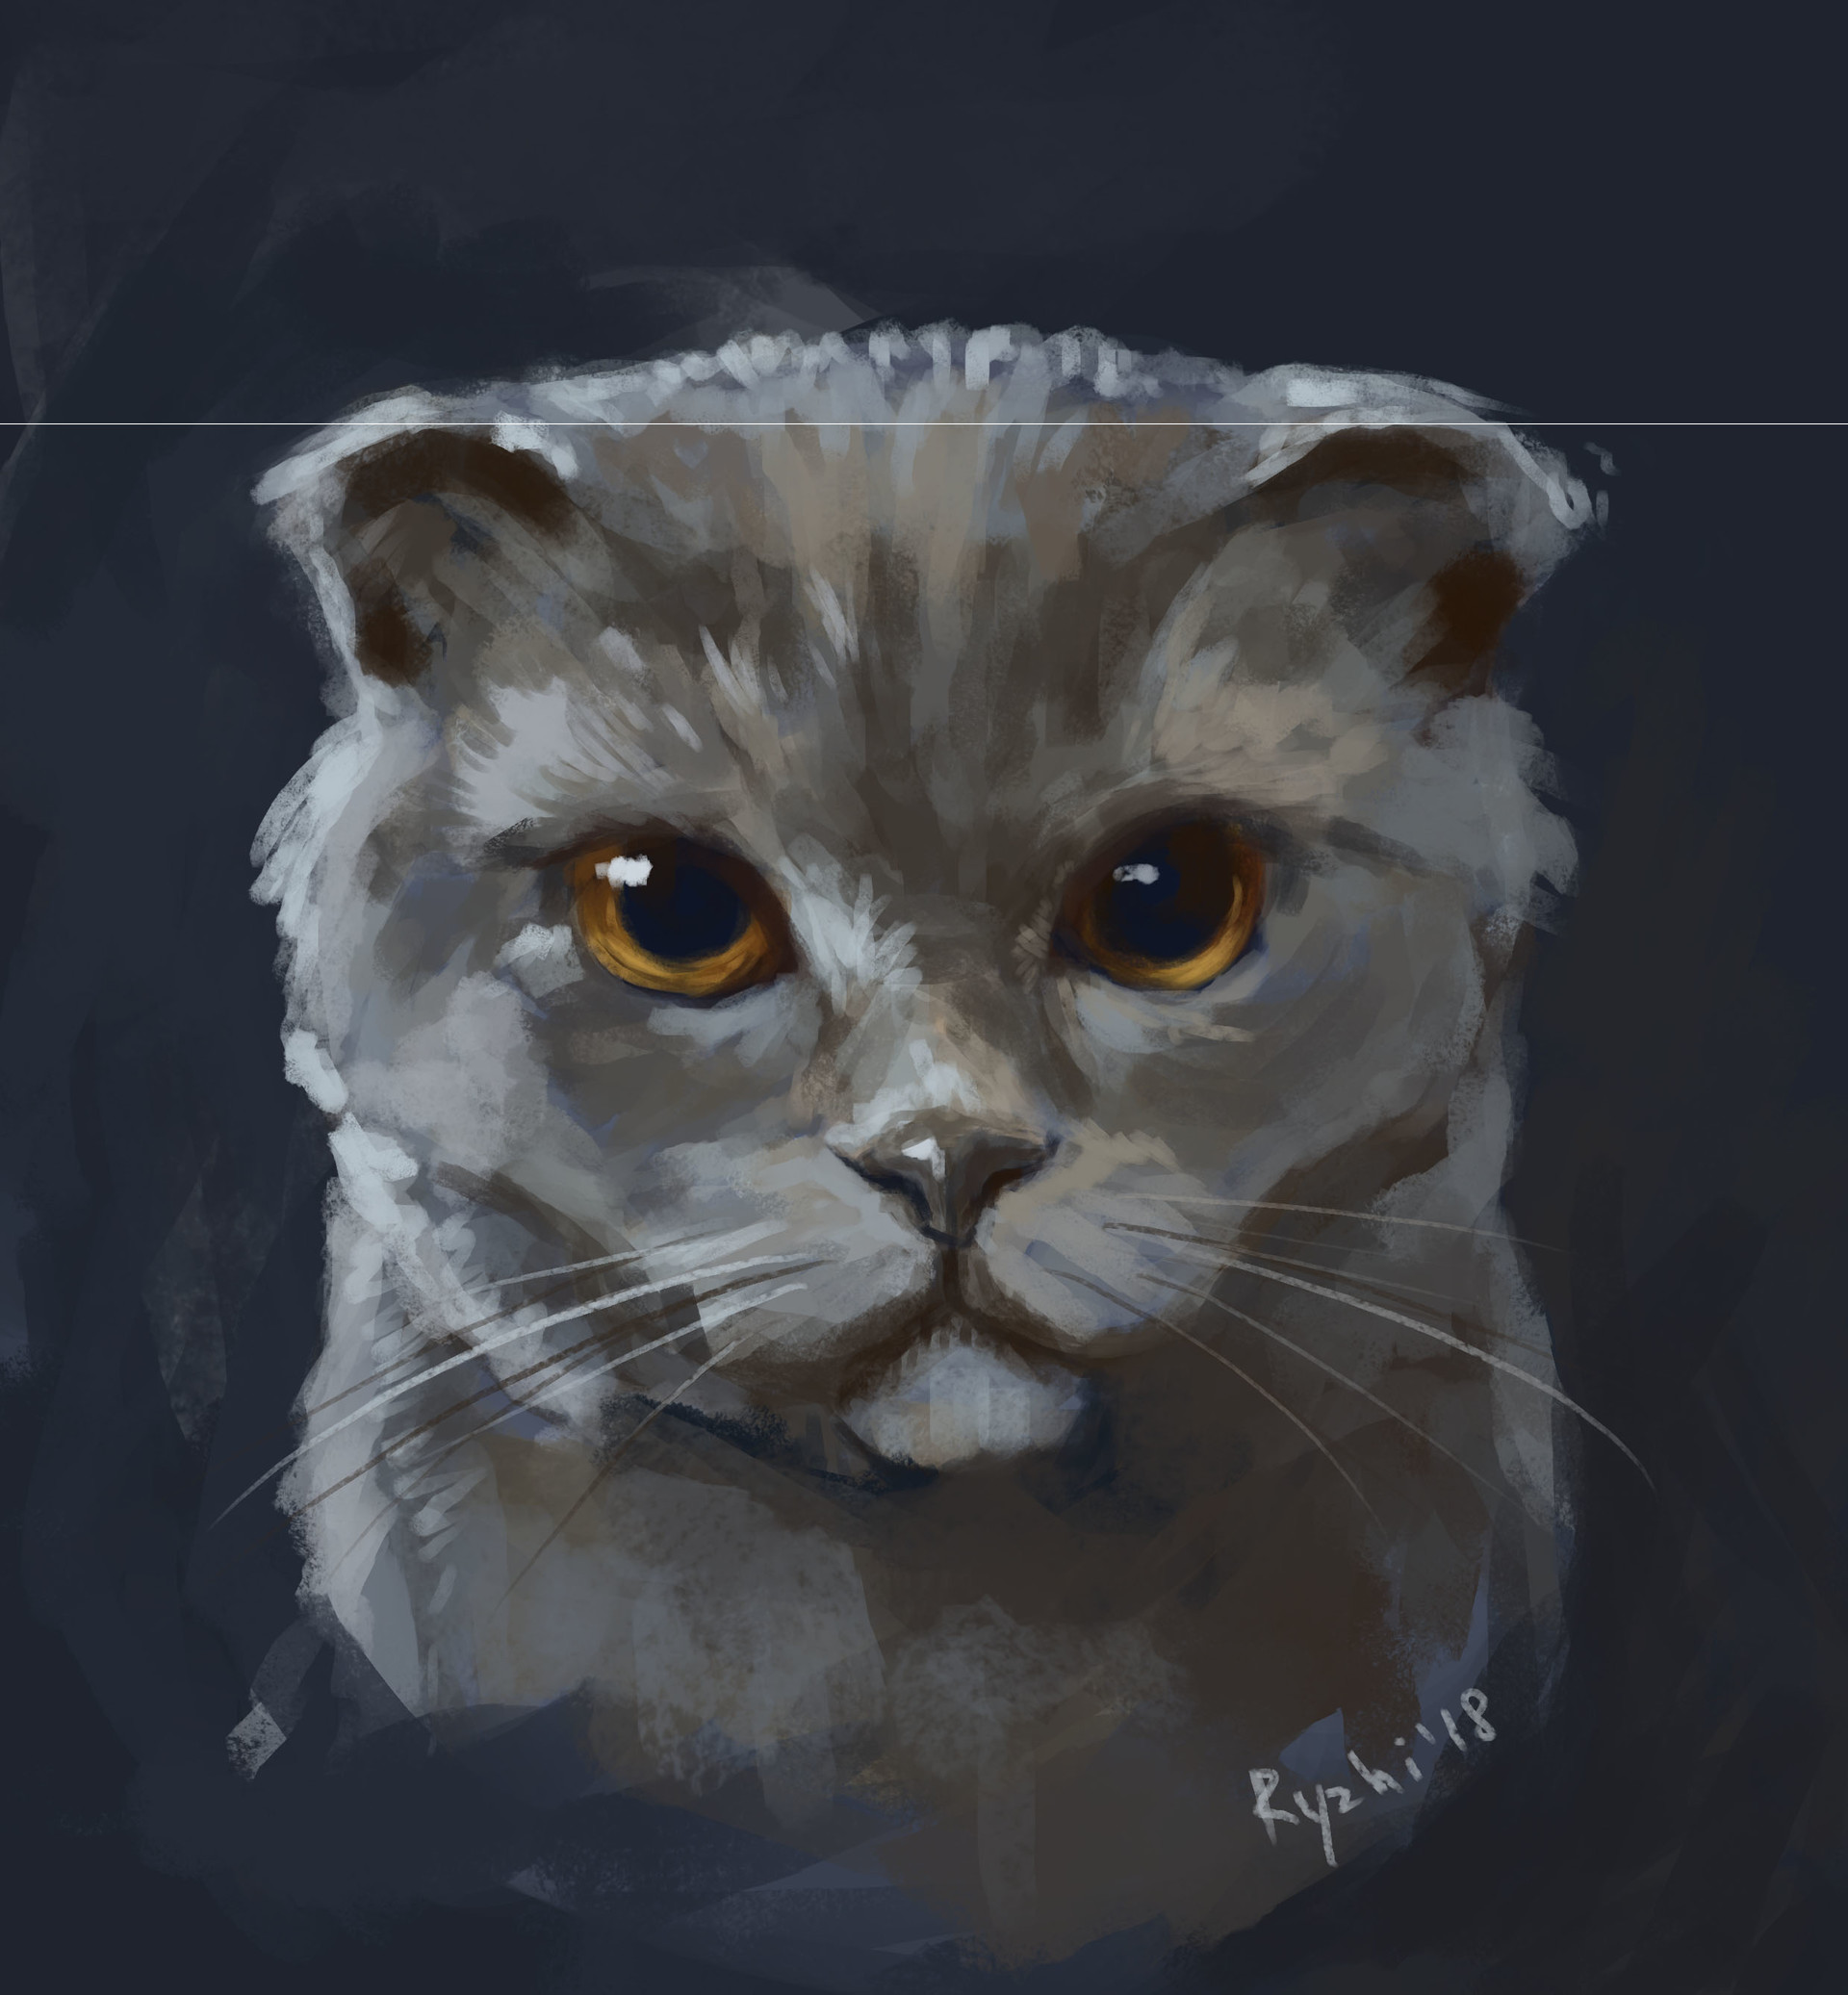 ArtStation - Fast cats sketches